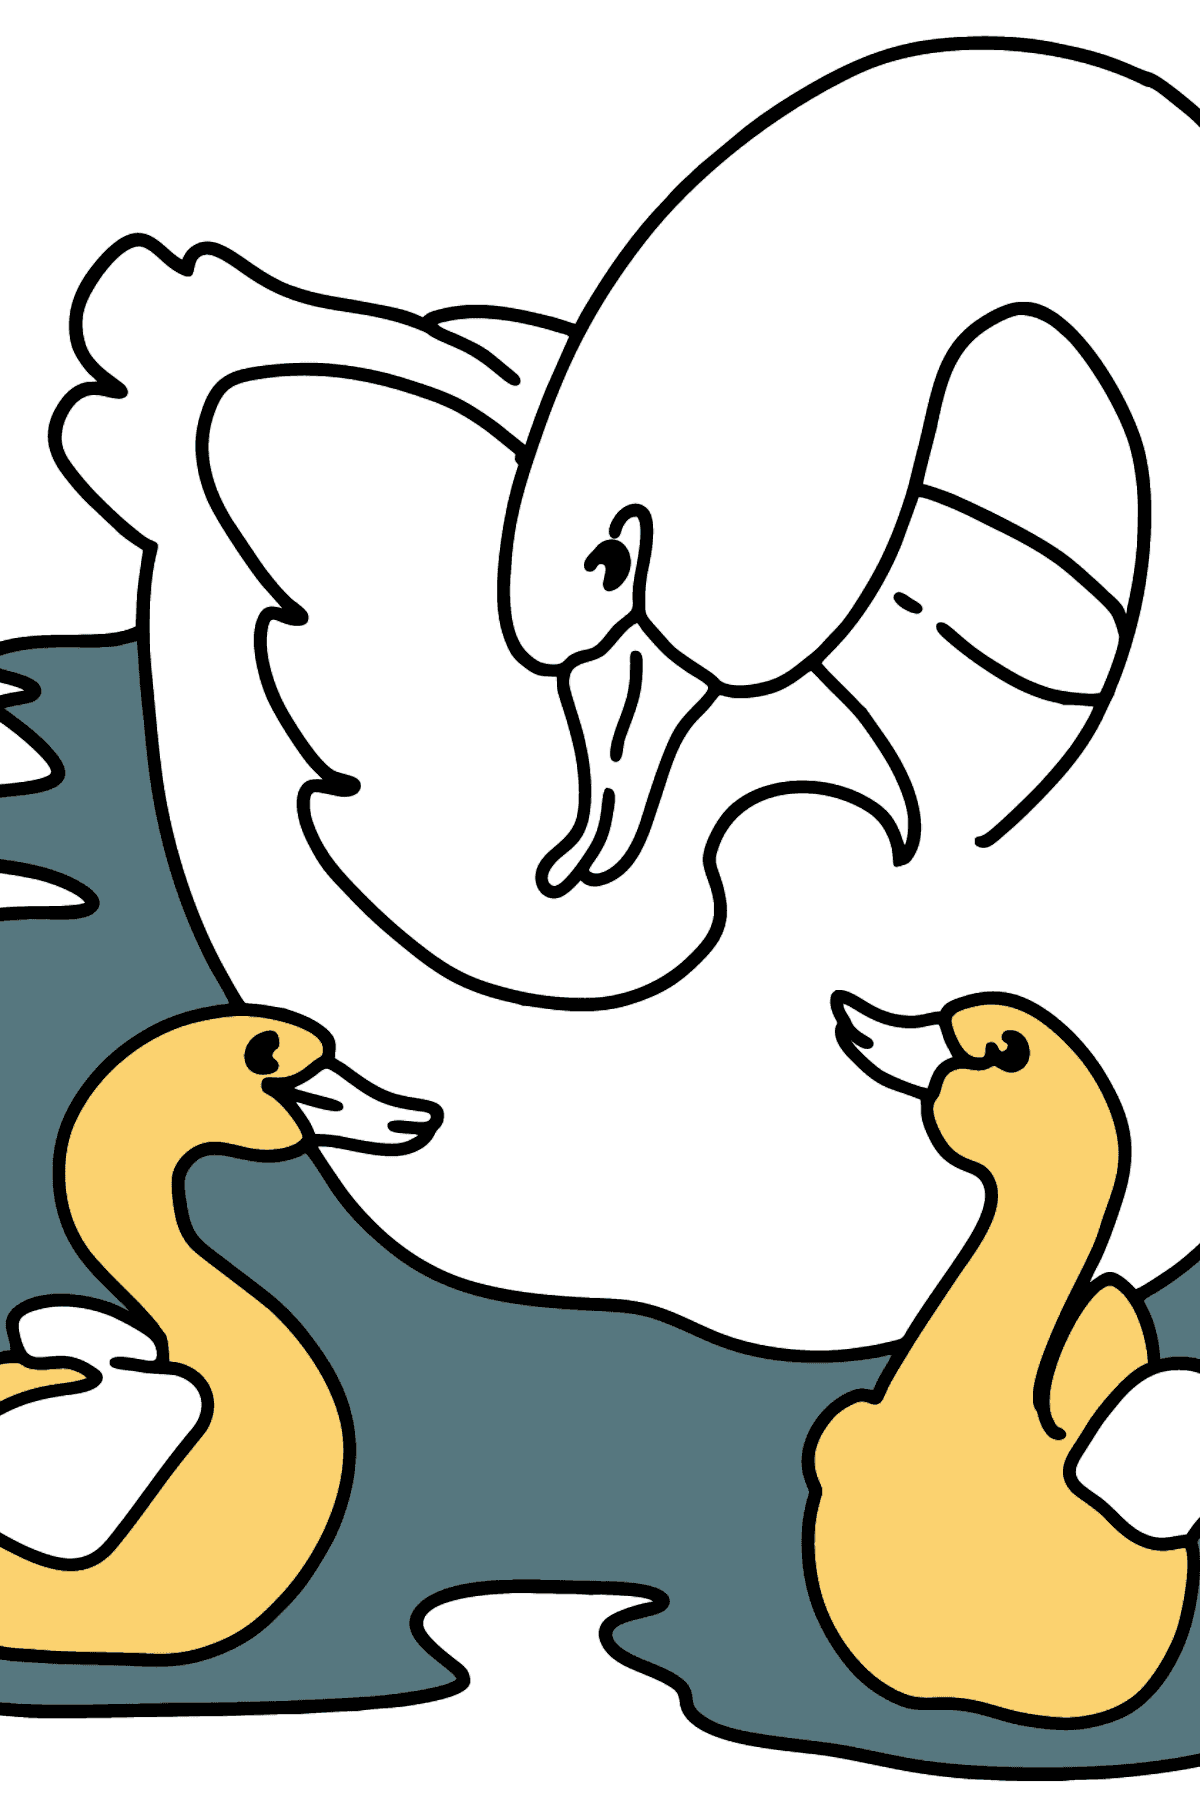 Duck with Ducklings on the Lake coloring page - Coloring Pages for Kids